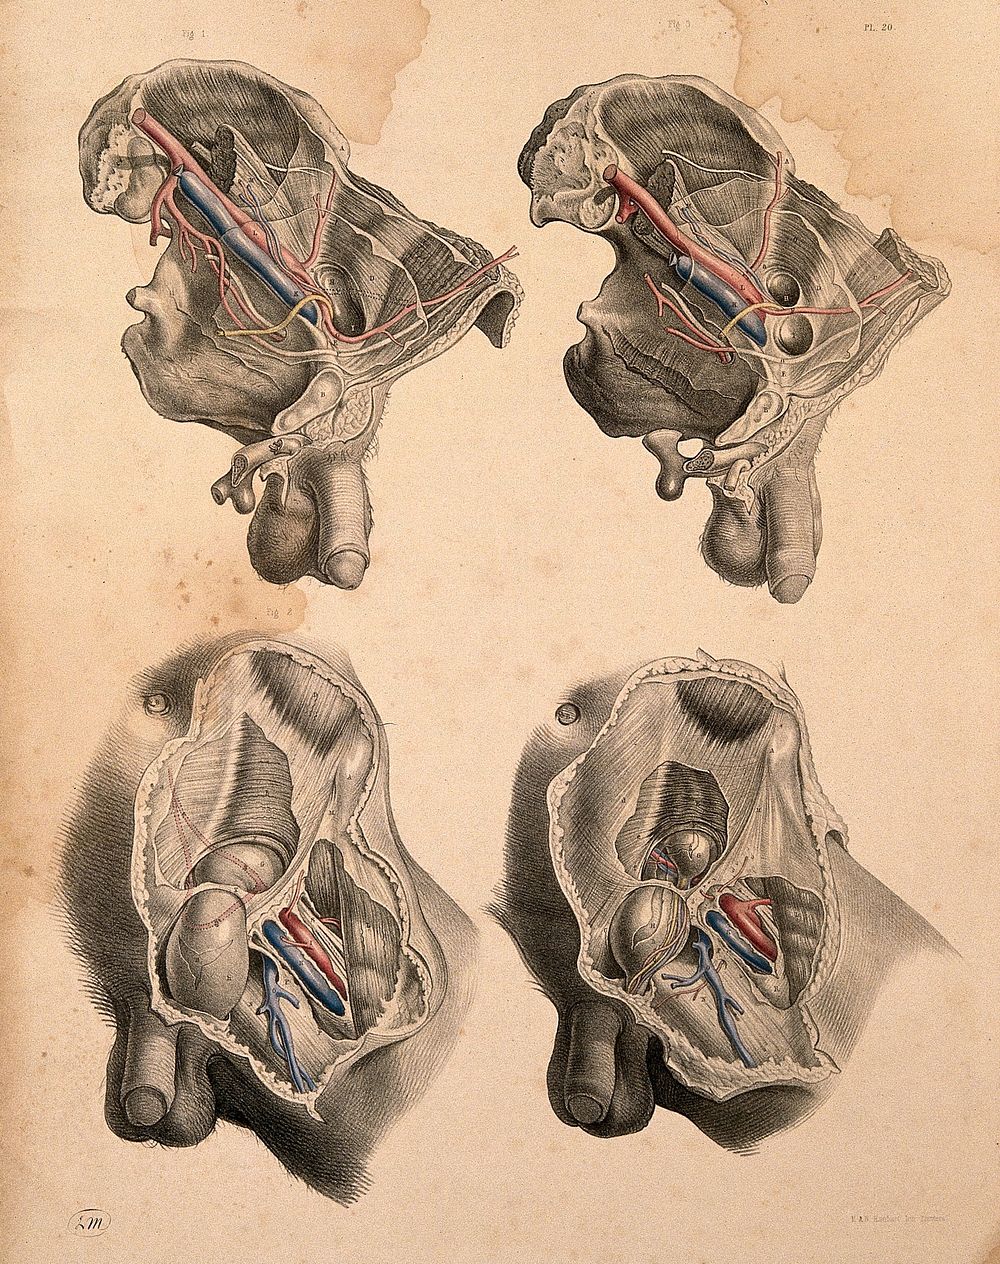 Dissection of the left groin of a man with hernia: four figures. Coloured lithograph by J. Maclise, 1851.